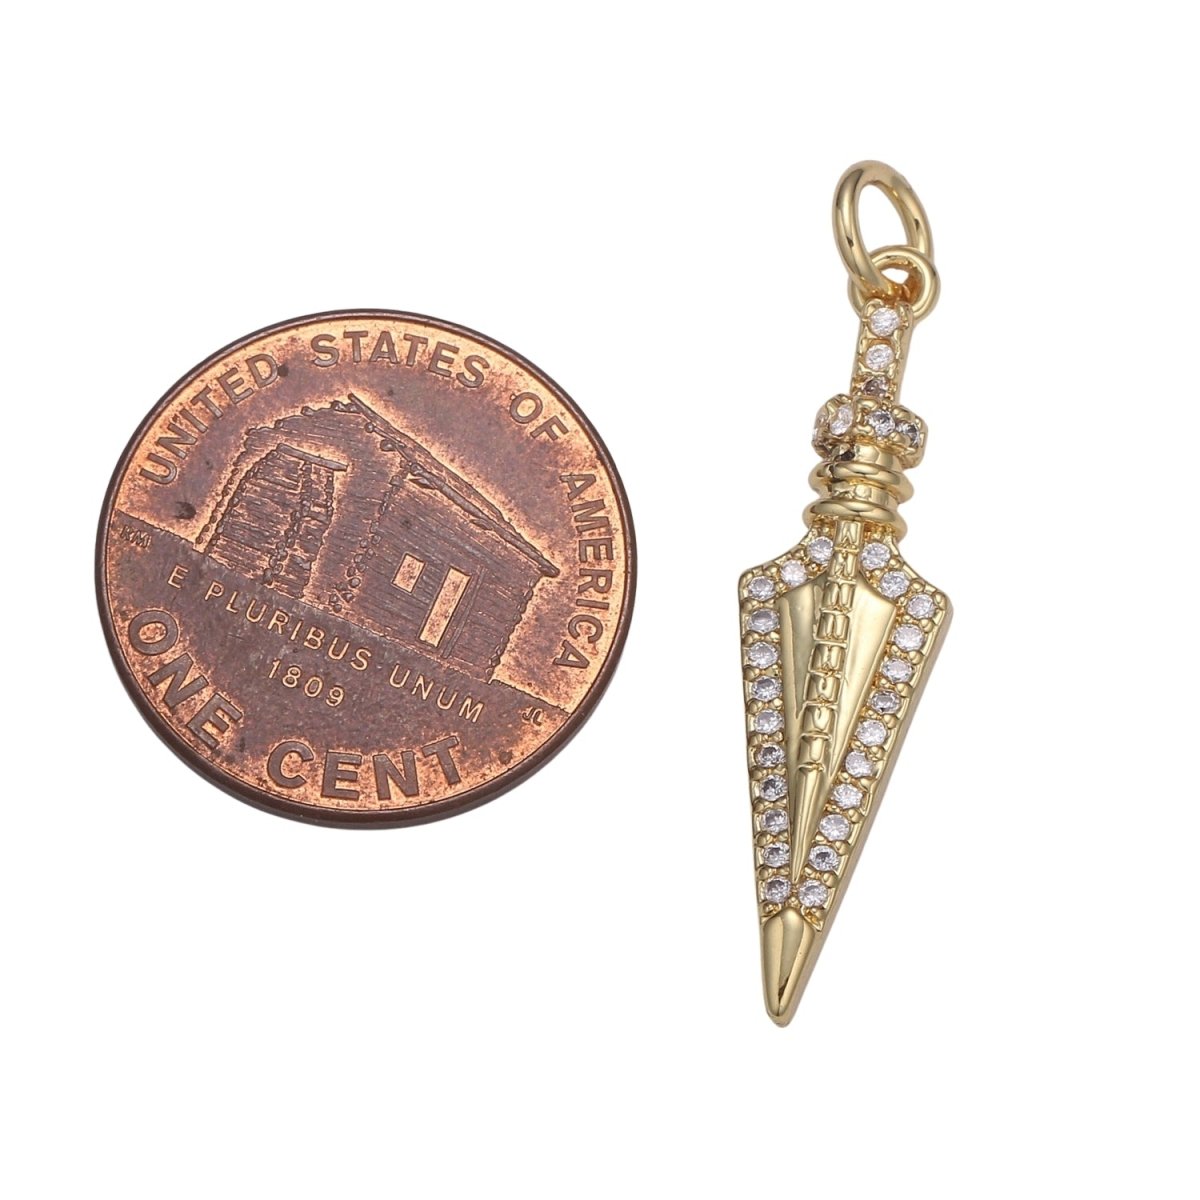 24k Gold Micro Pave Peg Charm, Cubic Zirconia Spear Pendant Charm, Charm, For DIY Jewelry E-205 E-790 - DLUXCA